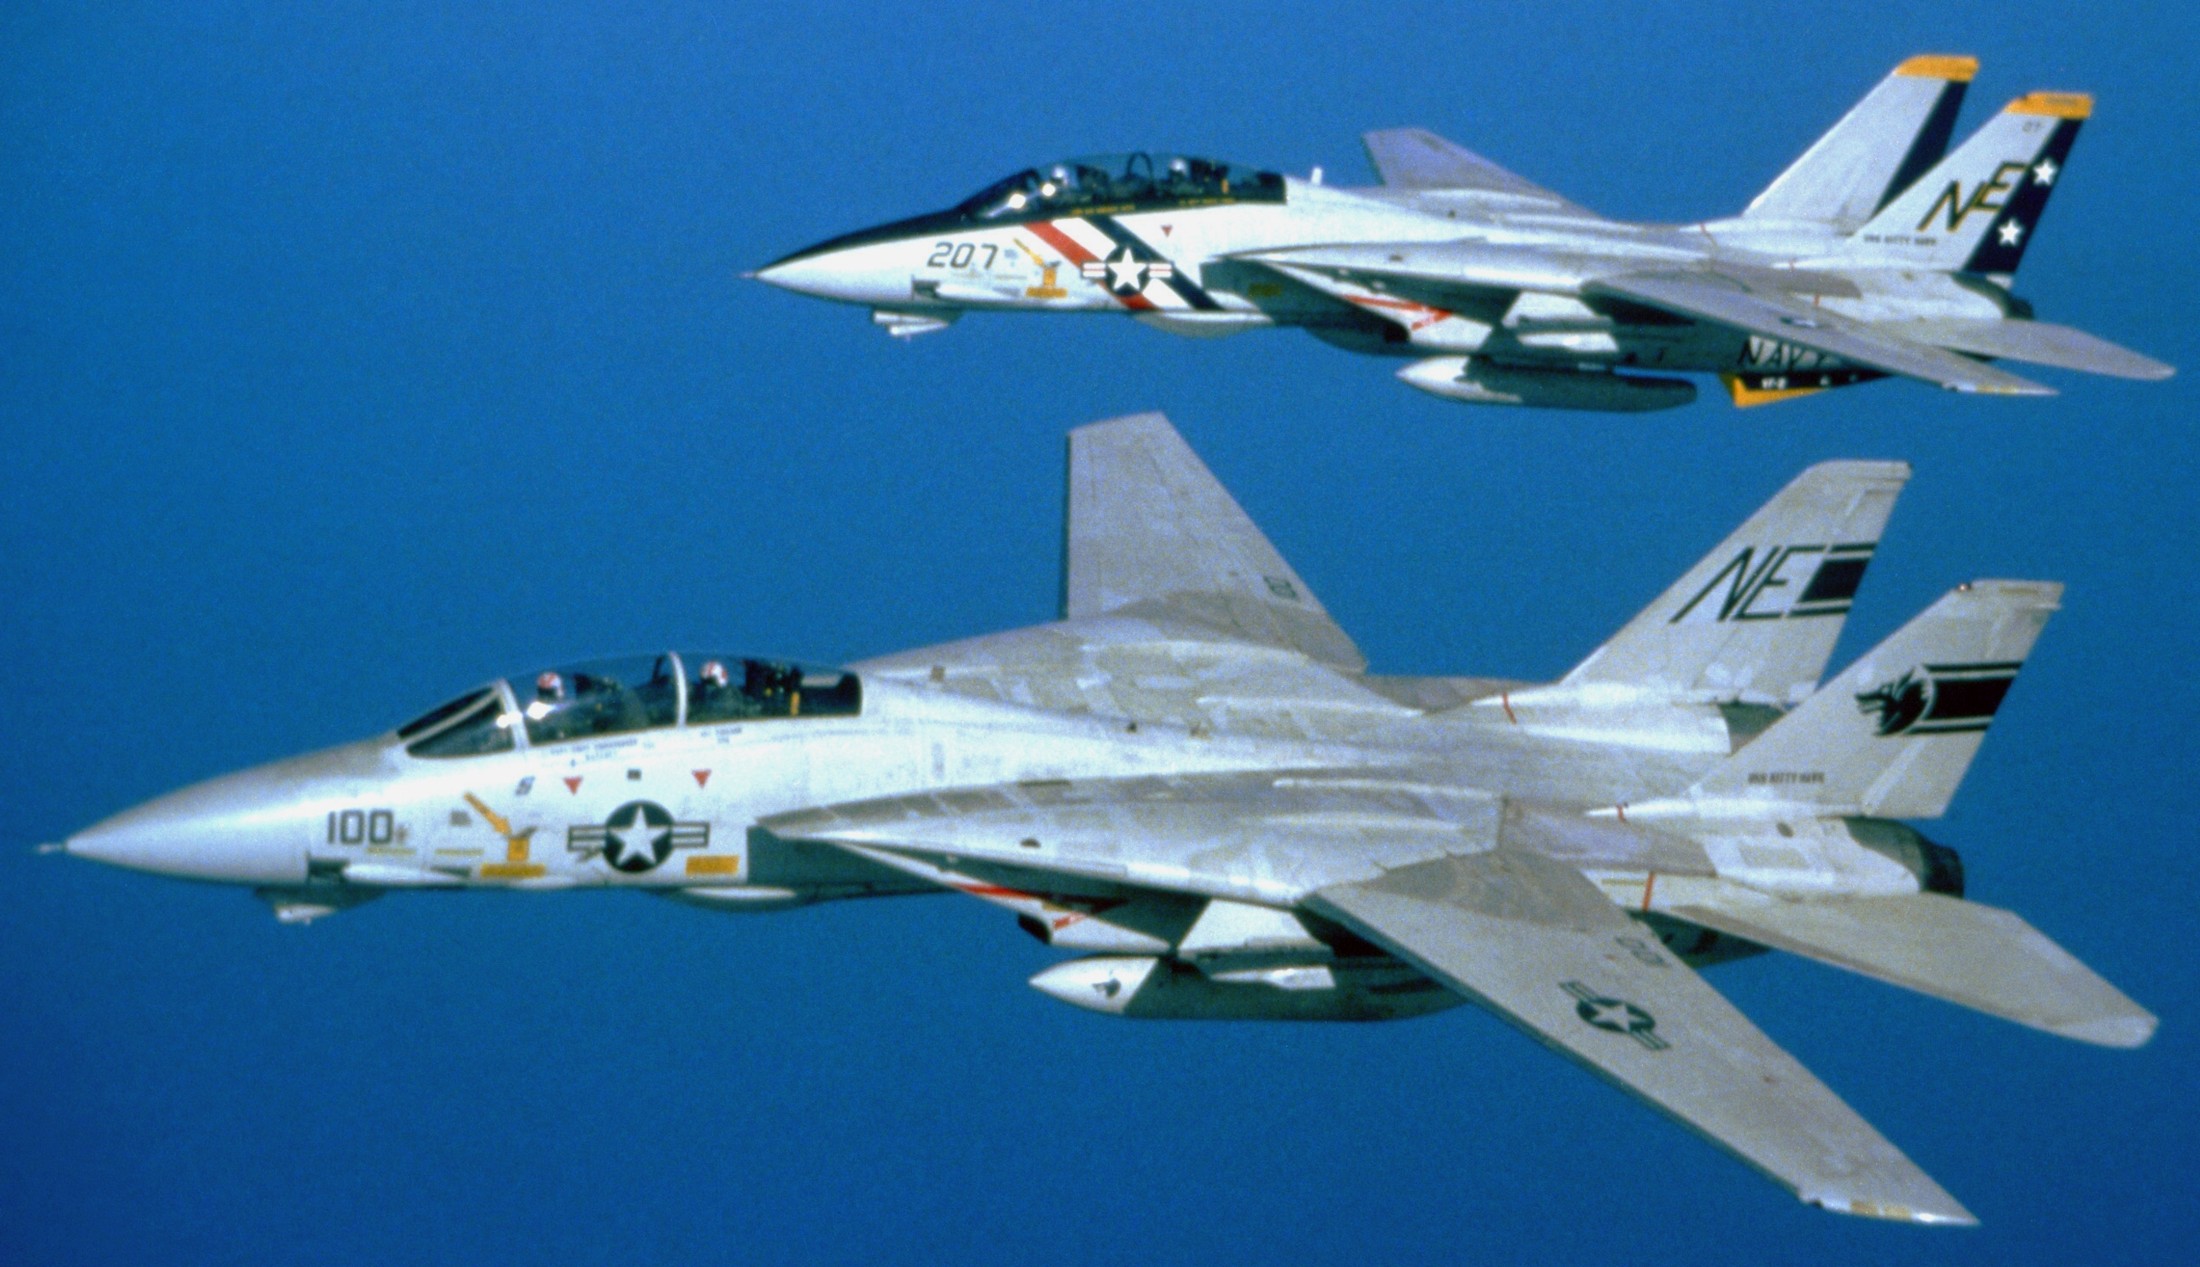 vf-1 wolfpack fighter squadron f-14a tomcat carrier air wing cvw-2 uss ranger cv-61 31